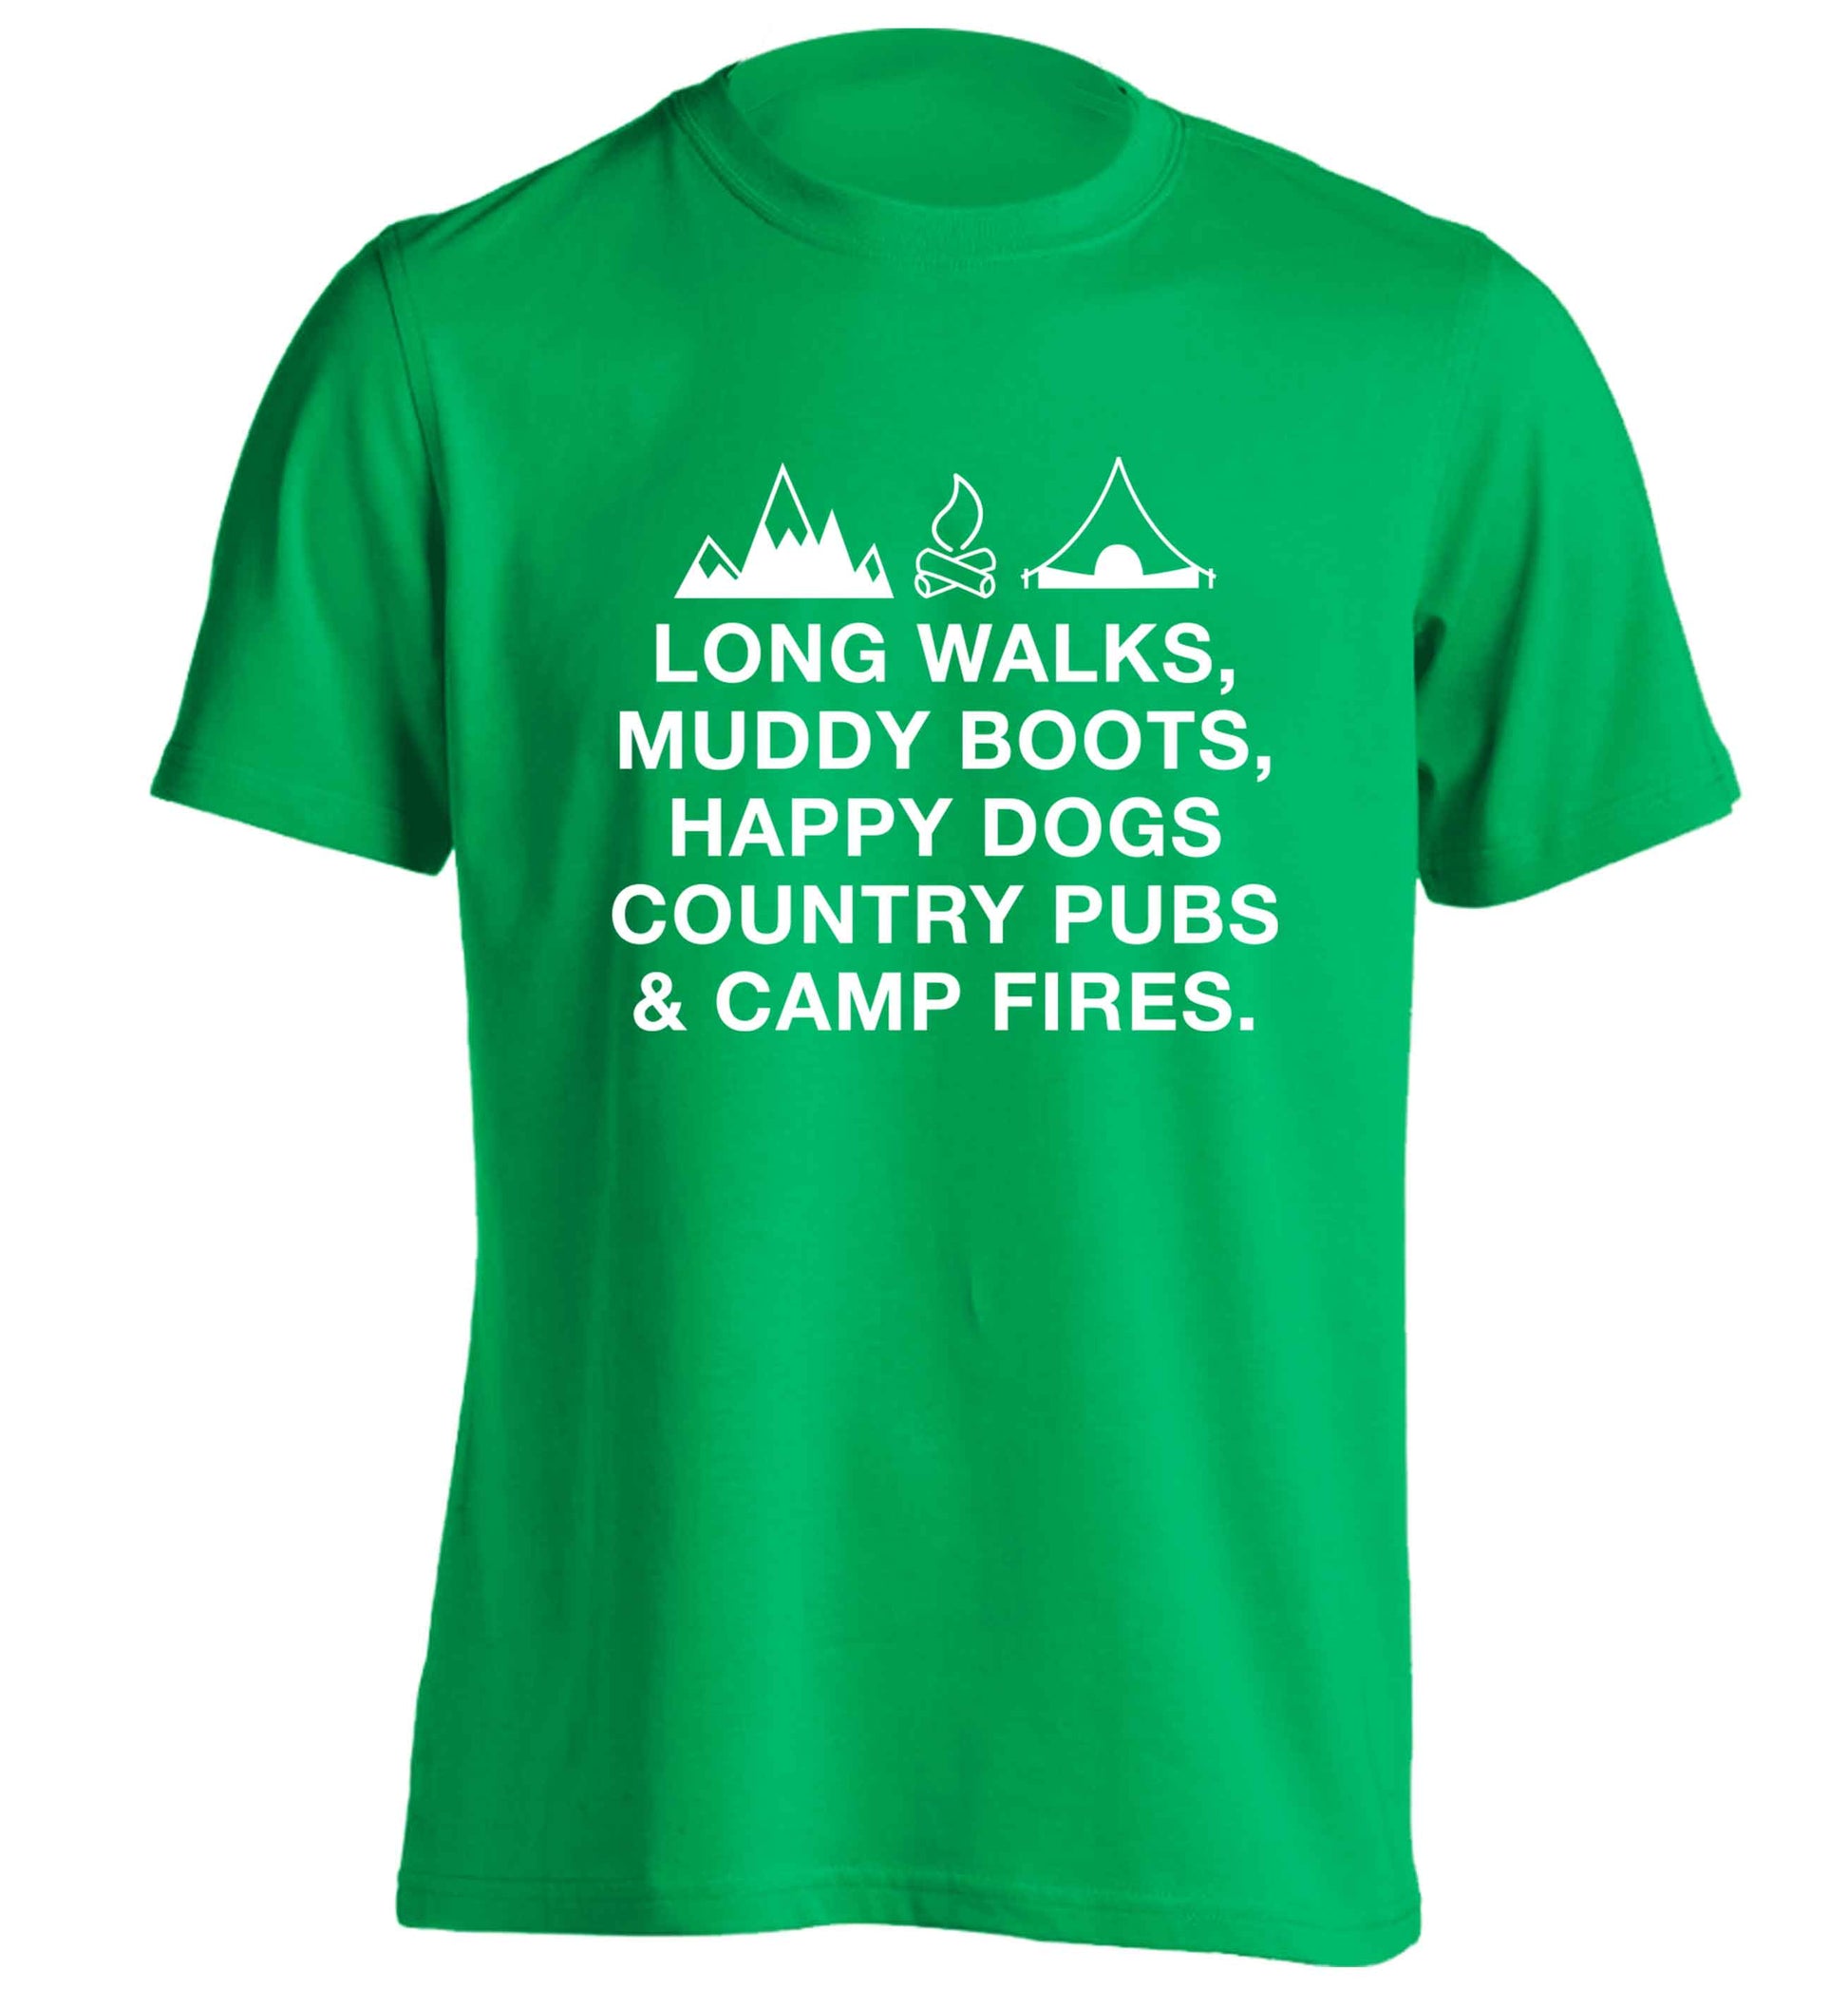 Long walks muddy boots happy dogs country pubs and camp fires adults unisex green Tshirt 2XL